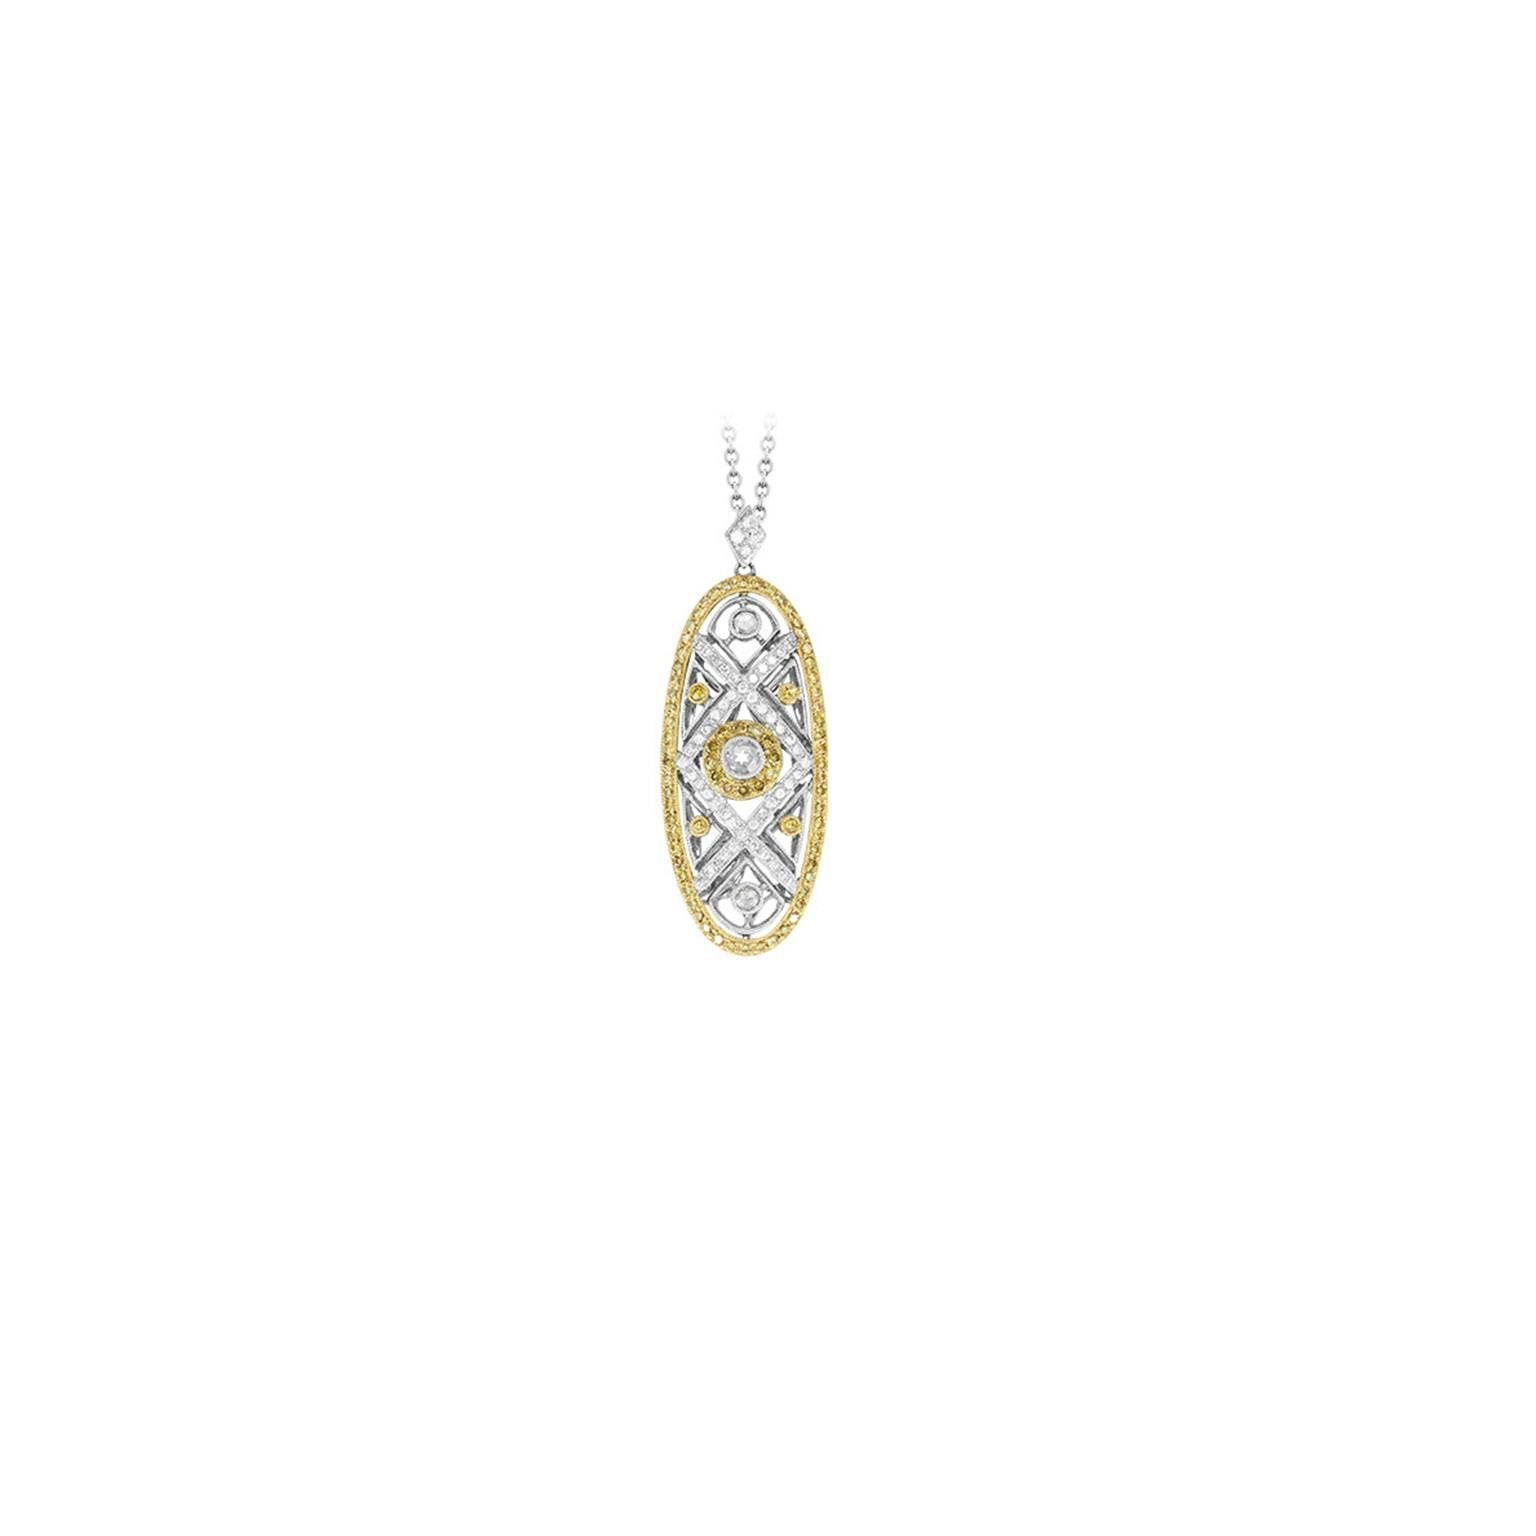 This captivating diamond and natural fancy yellow diamond 18k two-tone necklace features 103-round brilliant cut diamonds weighing approximately 2.32 carats total, having VS clarity and G color. Also set with 86-round brilliant cut natural fancy